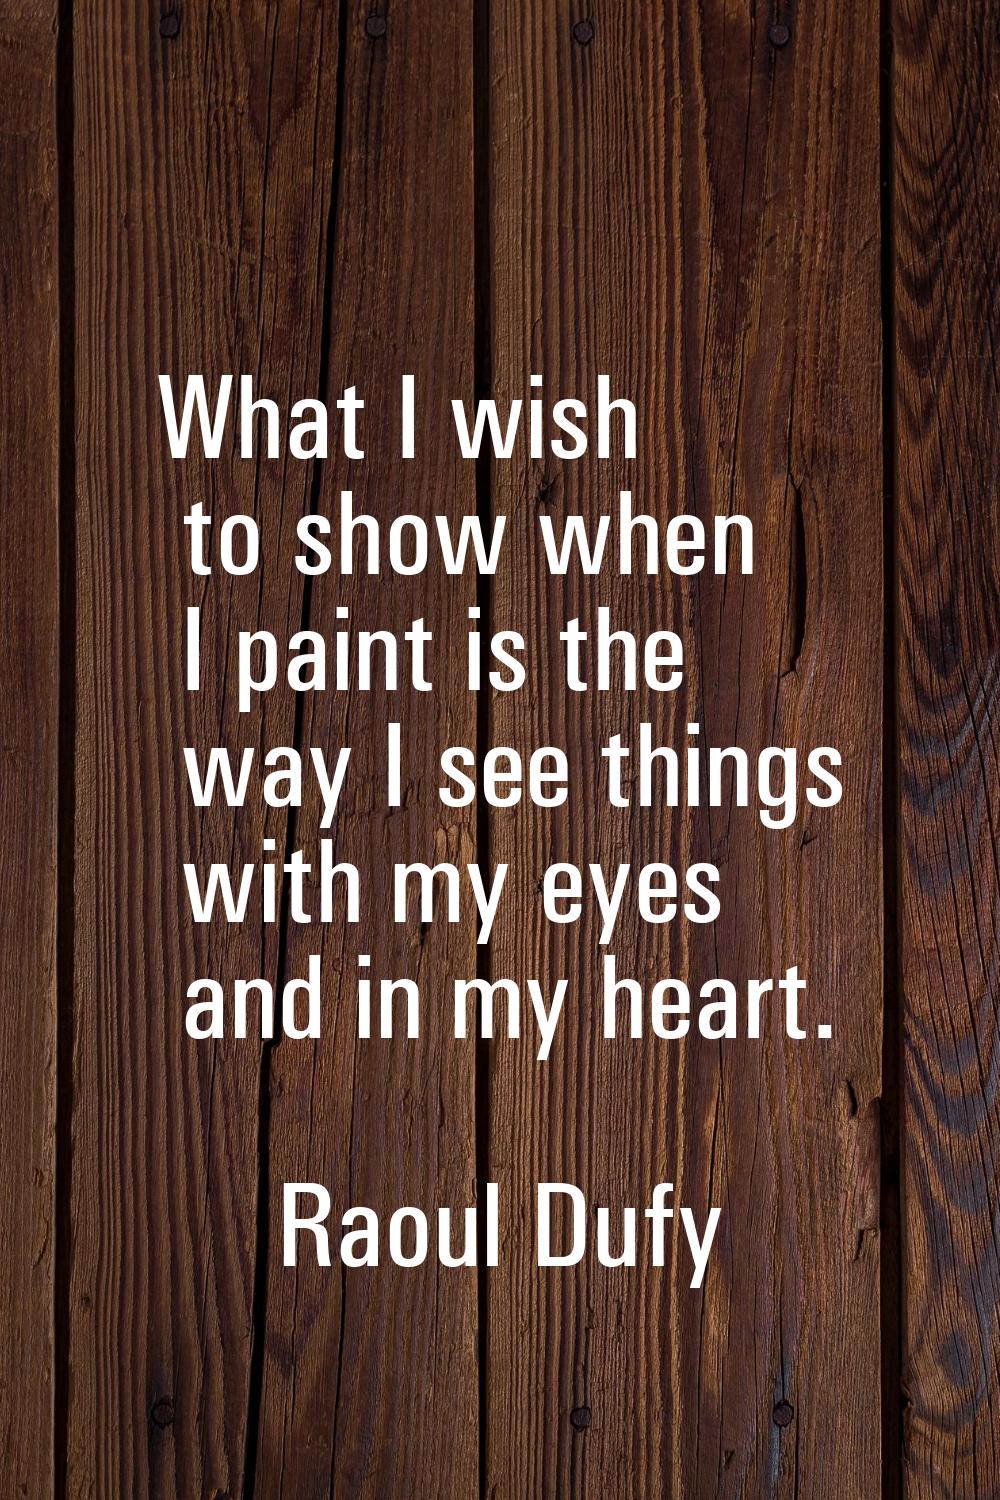 What I wish to show when I paint is the way I see things with my eyes and in my heart.